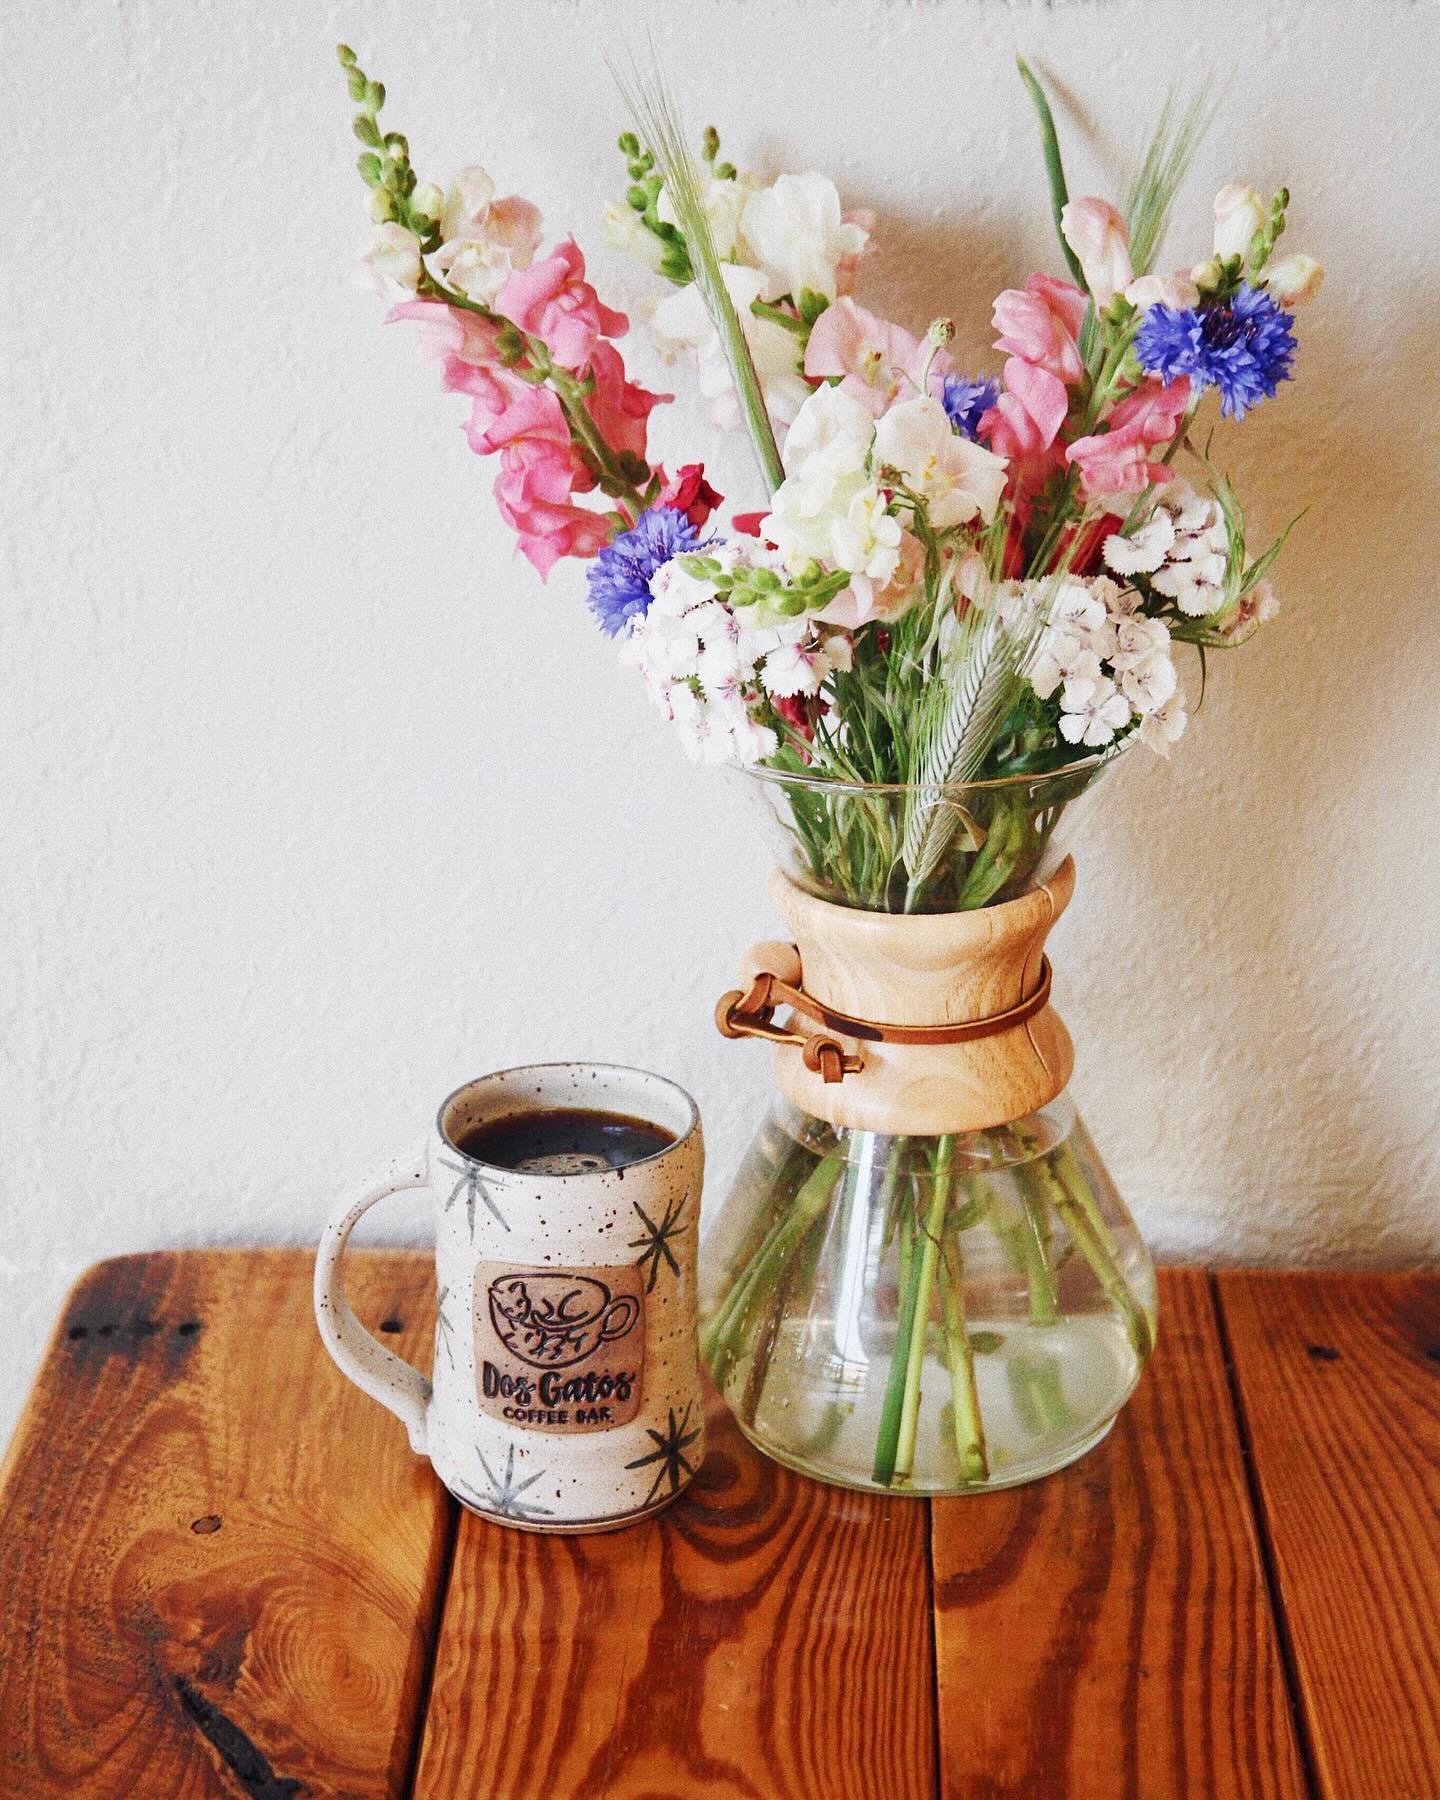 Happy Mother&rsquo;s Day to all the mamas out there! Come on by and celebrate them with a nice bev and a little treat, they deserve it 😊 #dosgatoscoffee